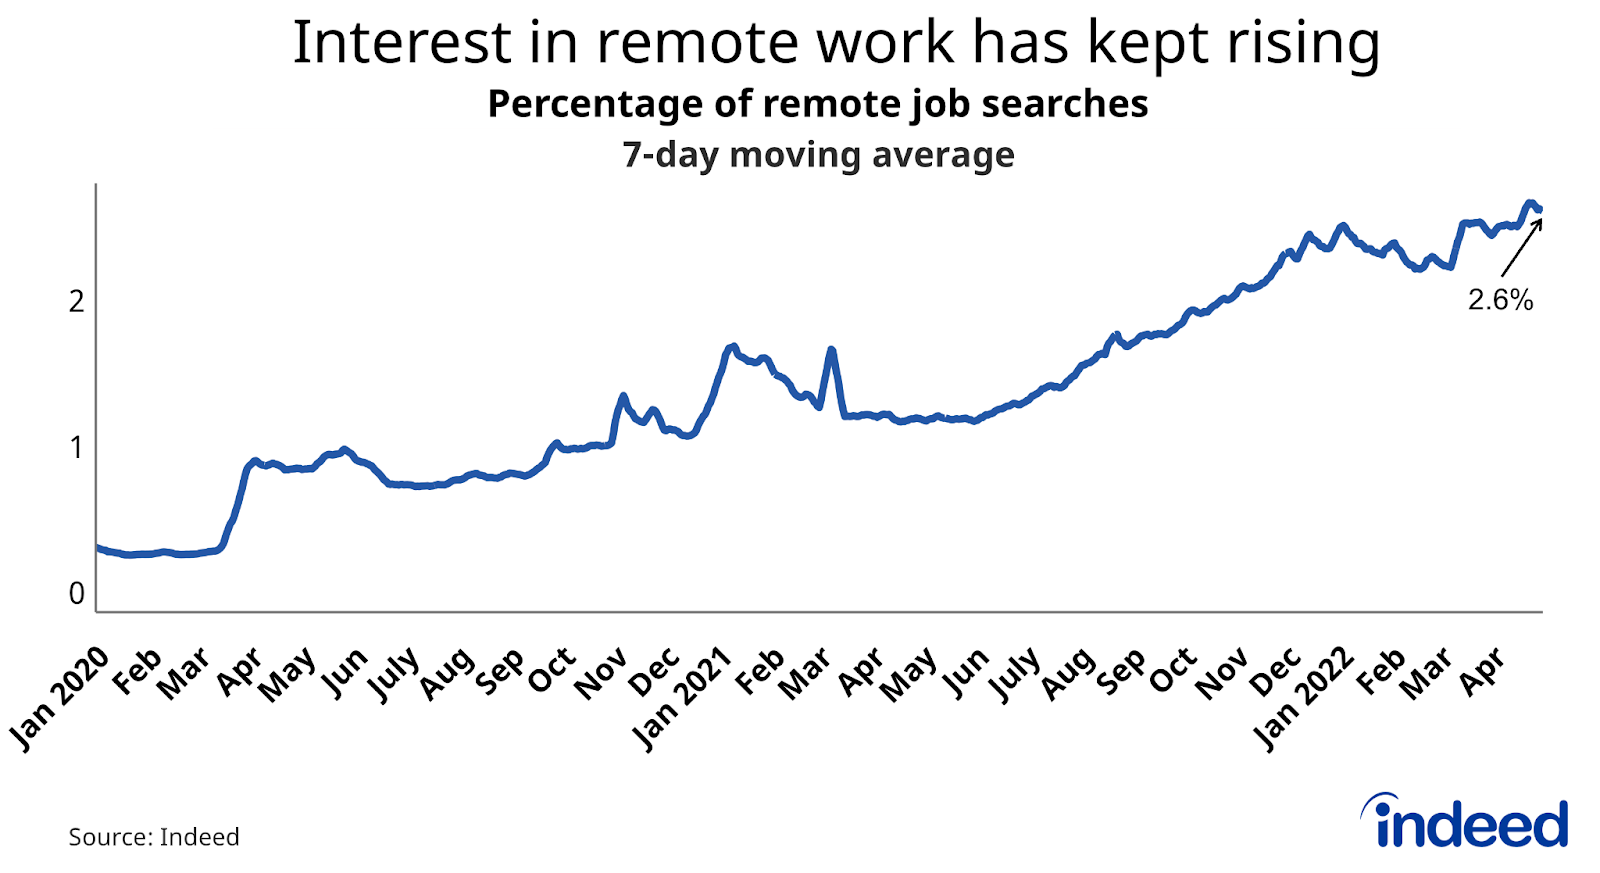 Line chart titled “Interest in remote work has kept rising” 